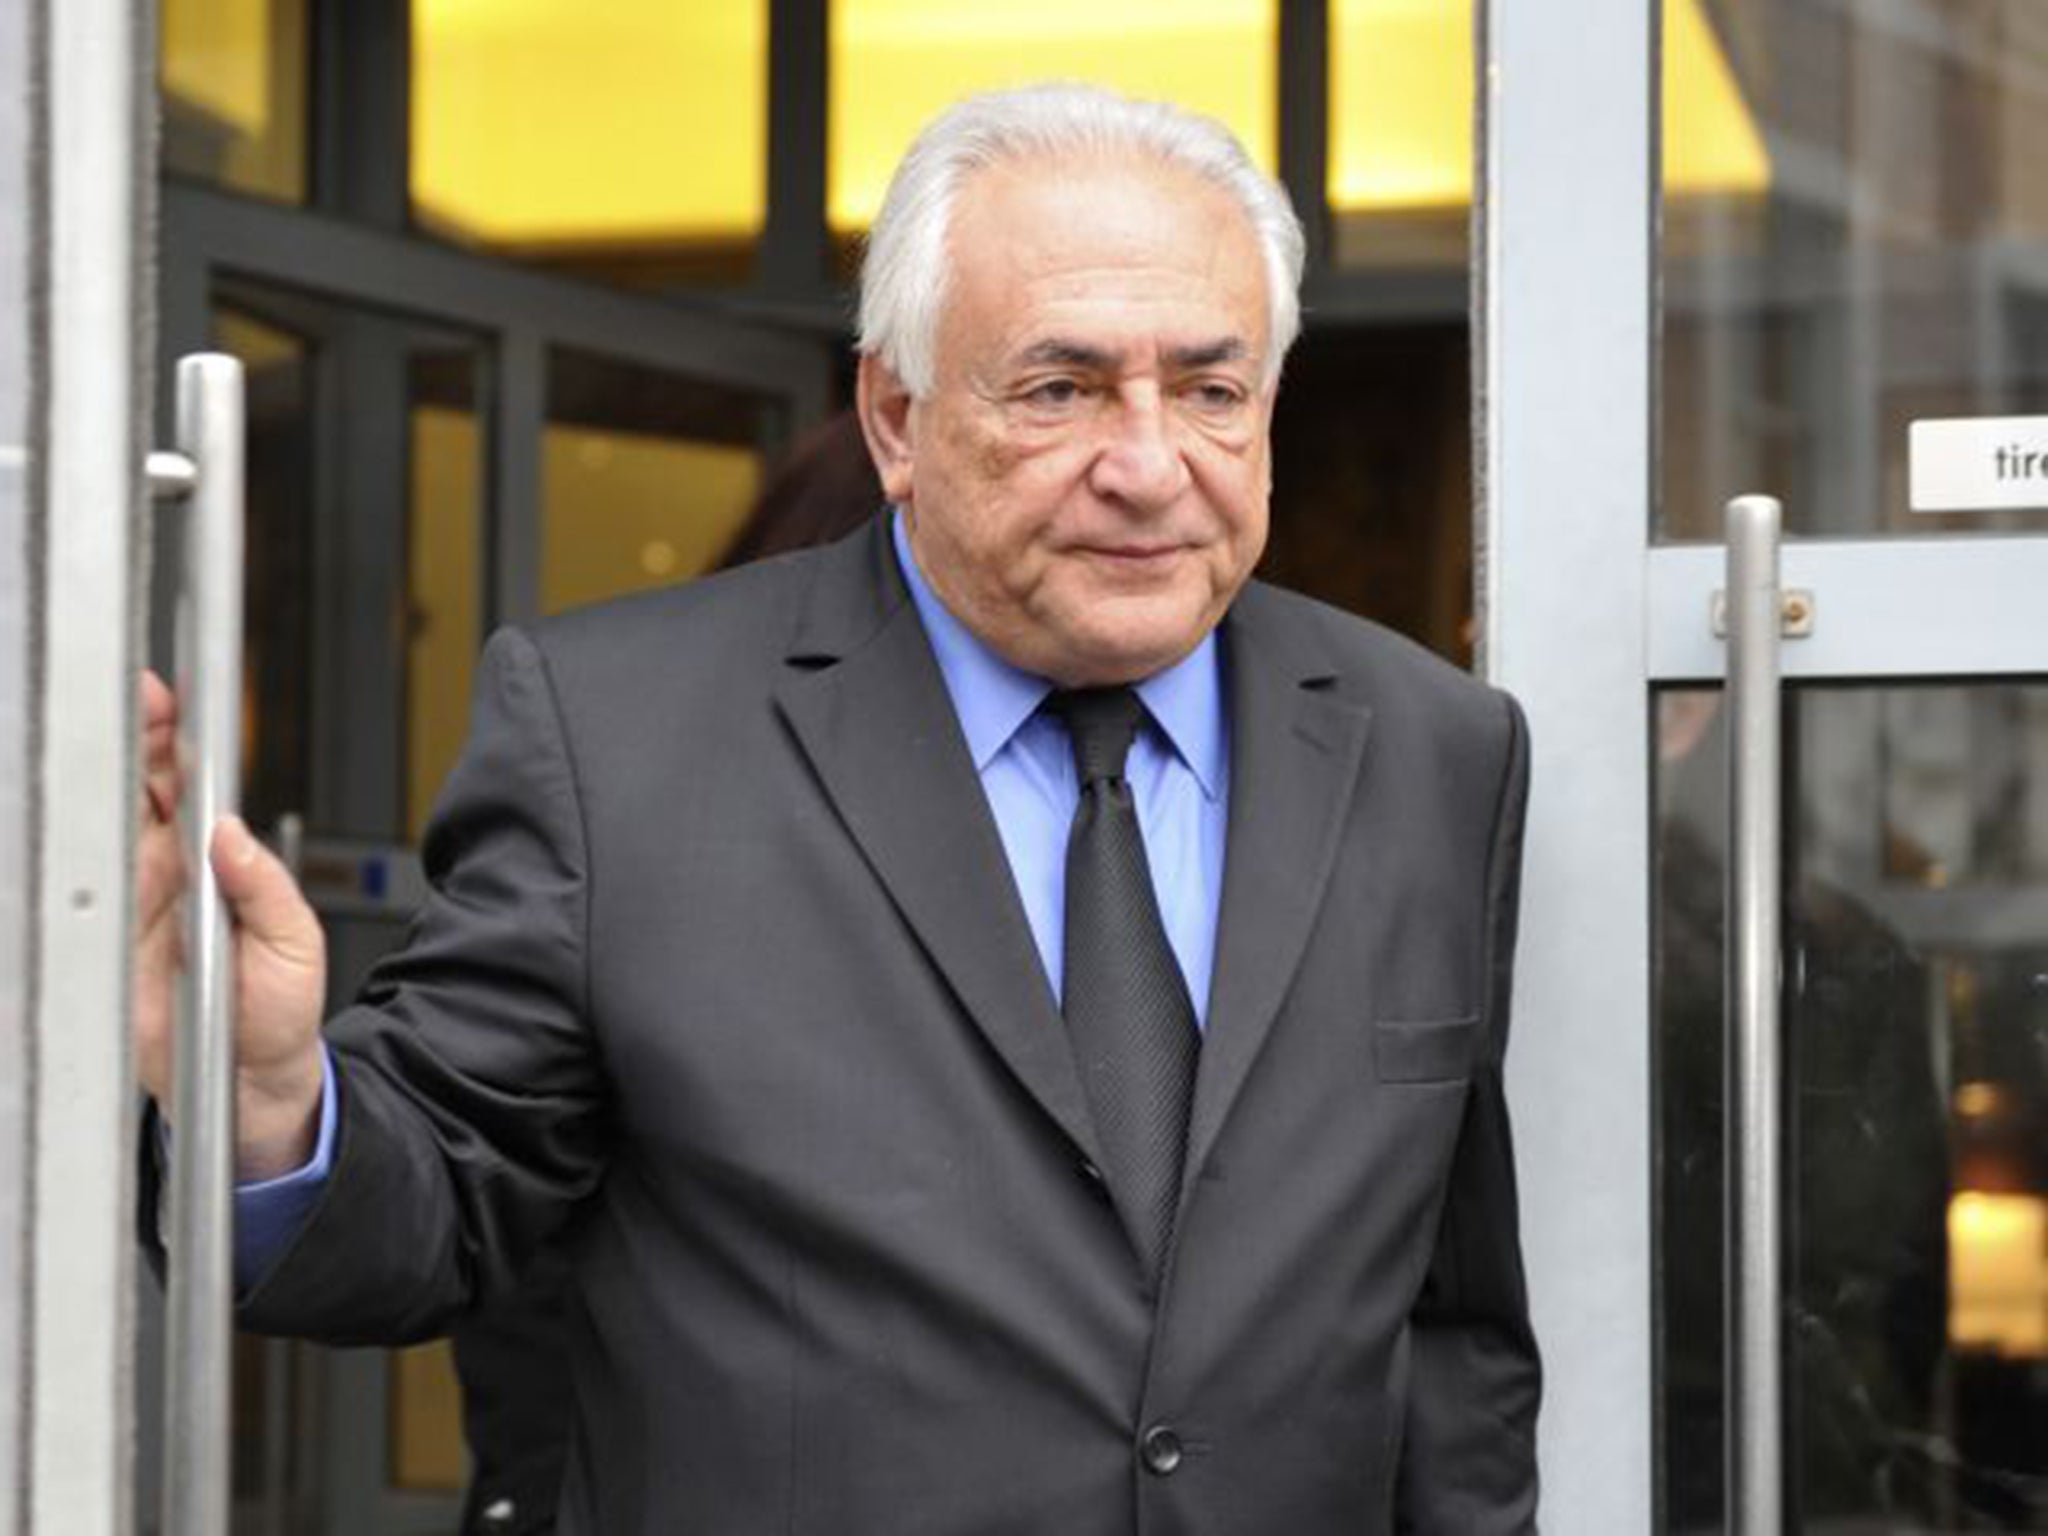 Dominique Strauss-Kahn faces up to 10 years in prison and 1.5 million euros (£977m) in fines if he is convicted